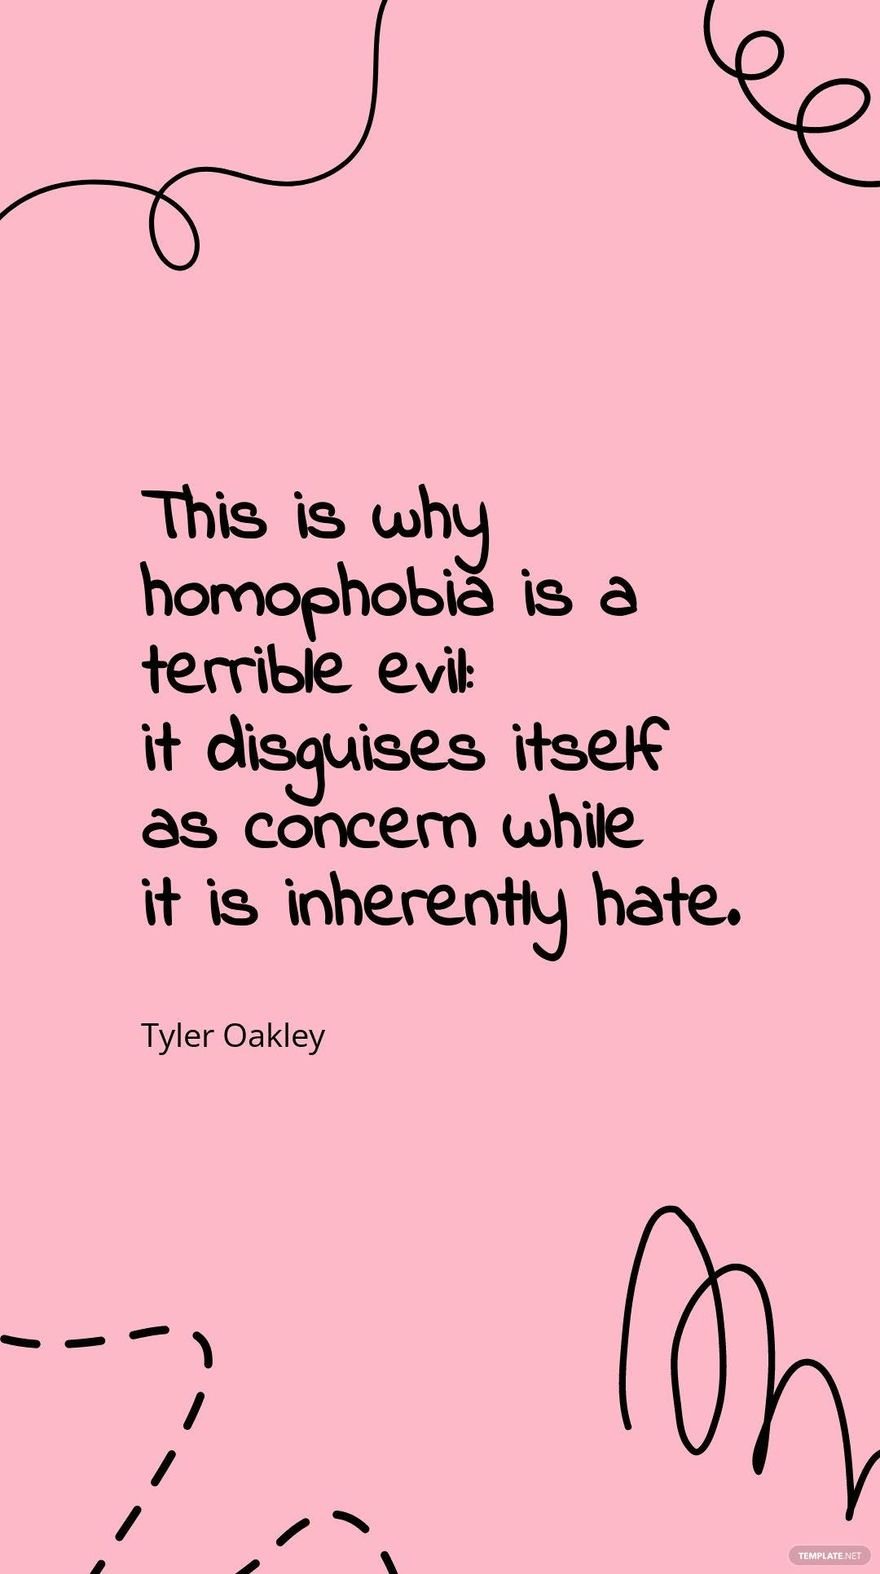 Free Tyler Oakley - This is why homophobia is a terrible evil: it disguises itself as concern while it is inherently hate. in JPG